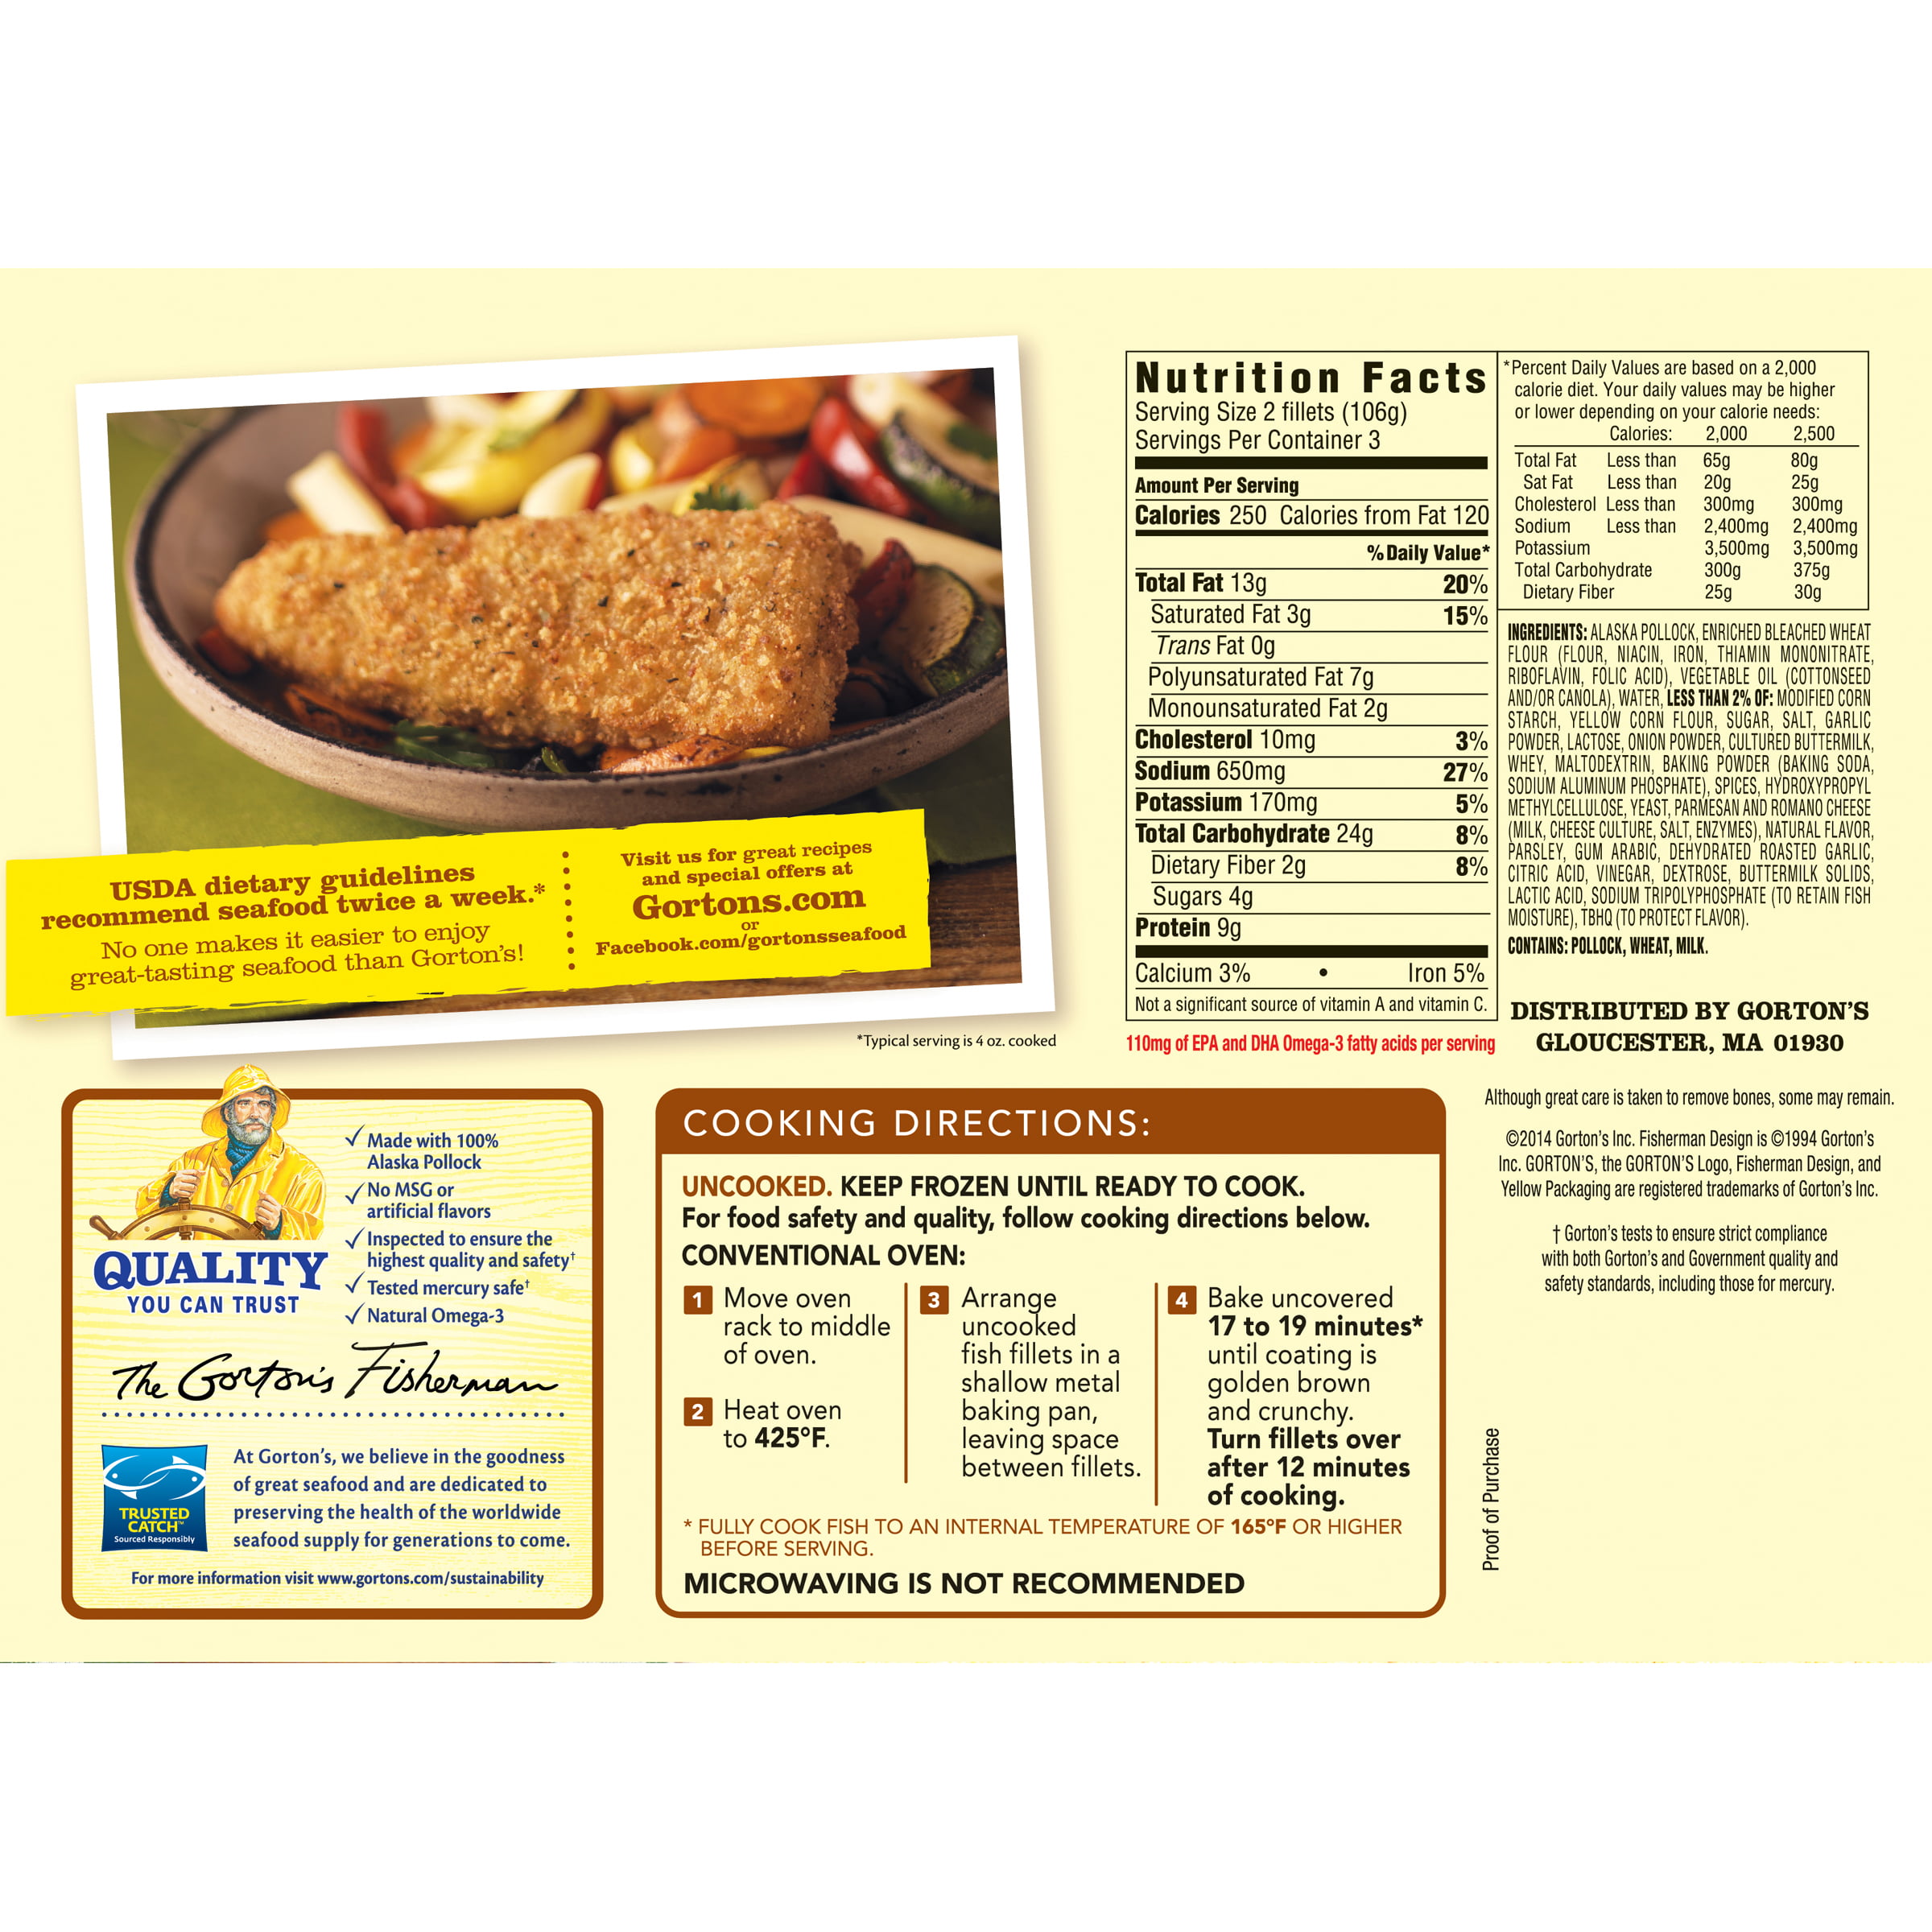 microwave fish fillets